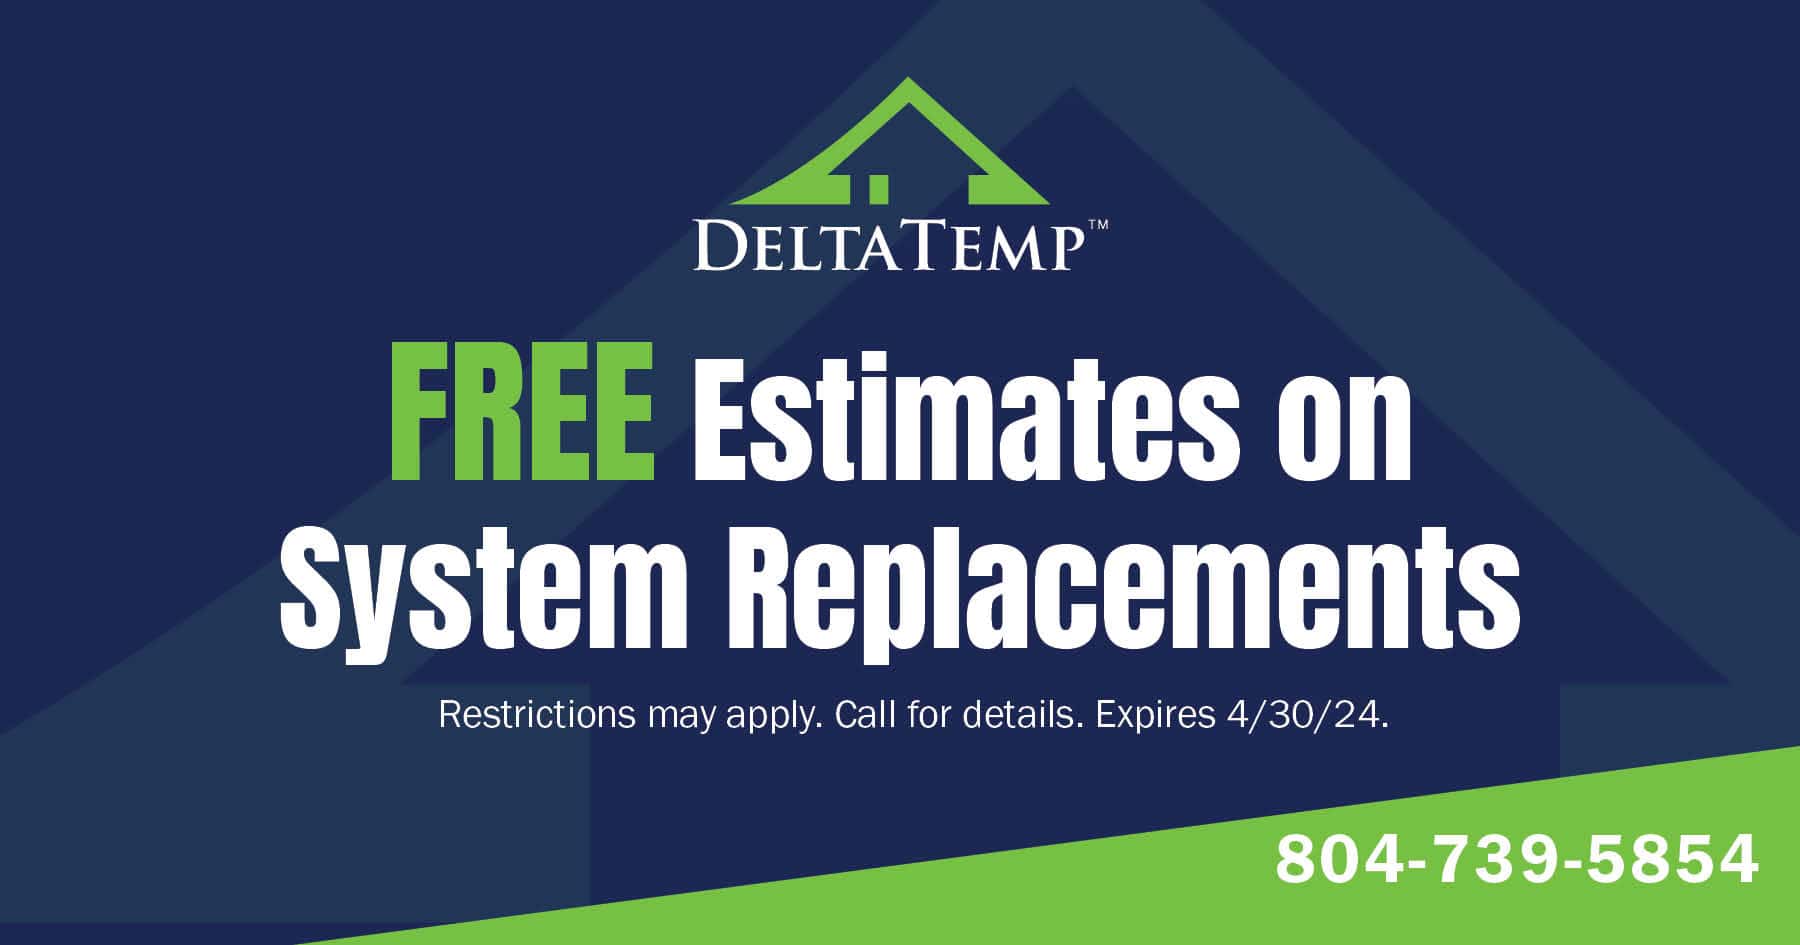 Free estimates on system replacements. Restrictions may apply. Call for details. Expires 4/30/2024.